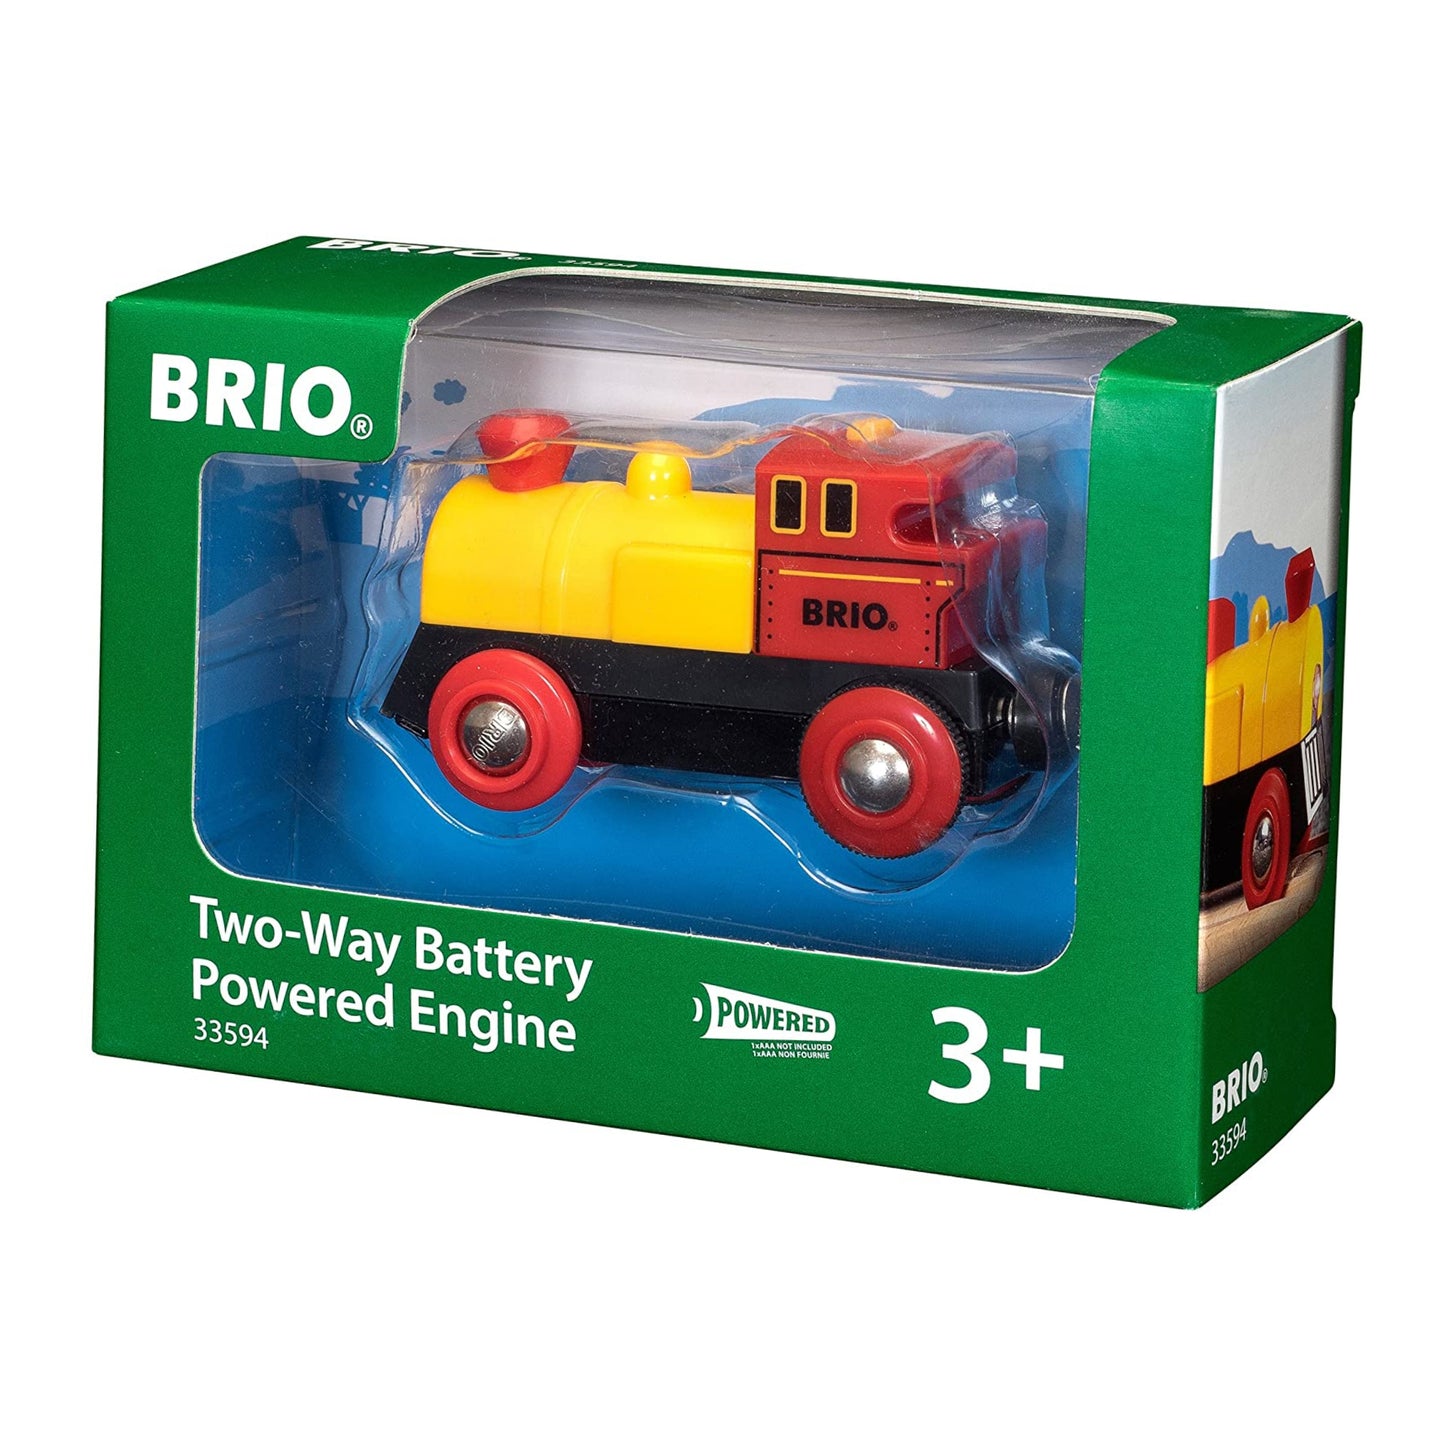 Two-Way Battery Powered Engine Train